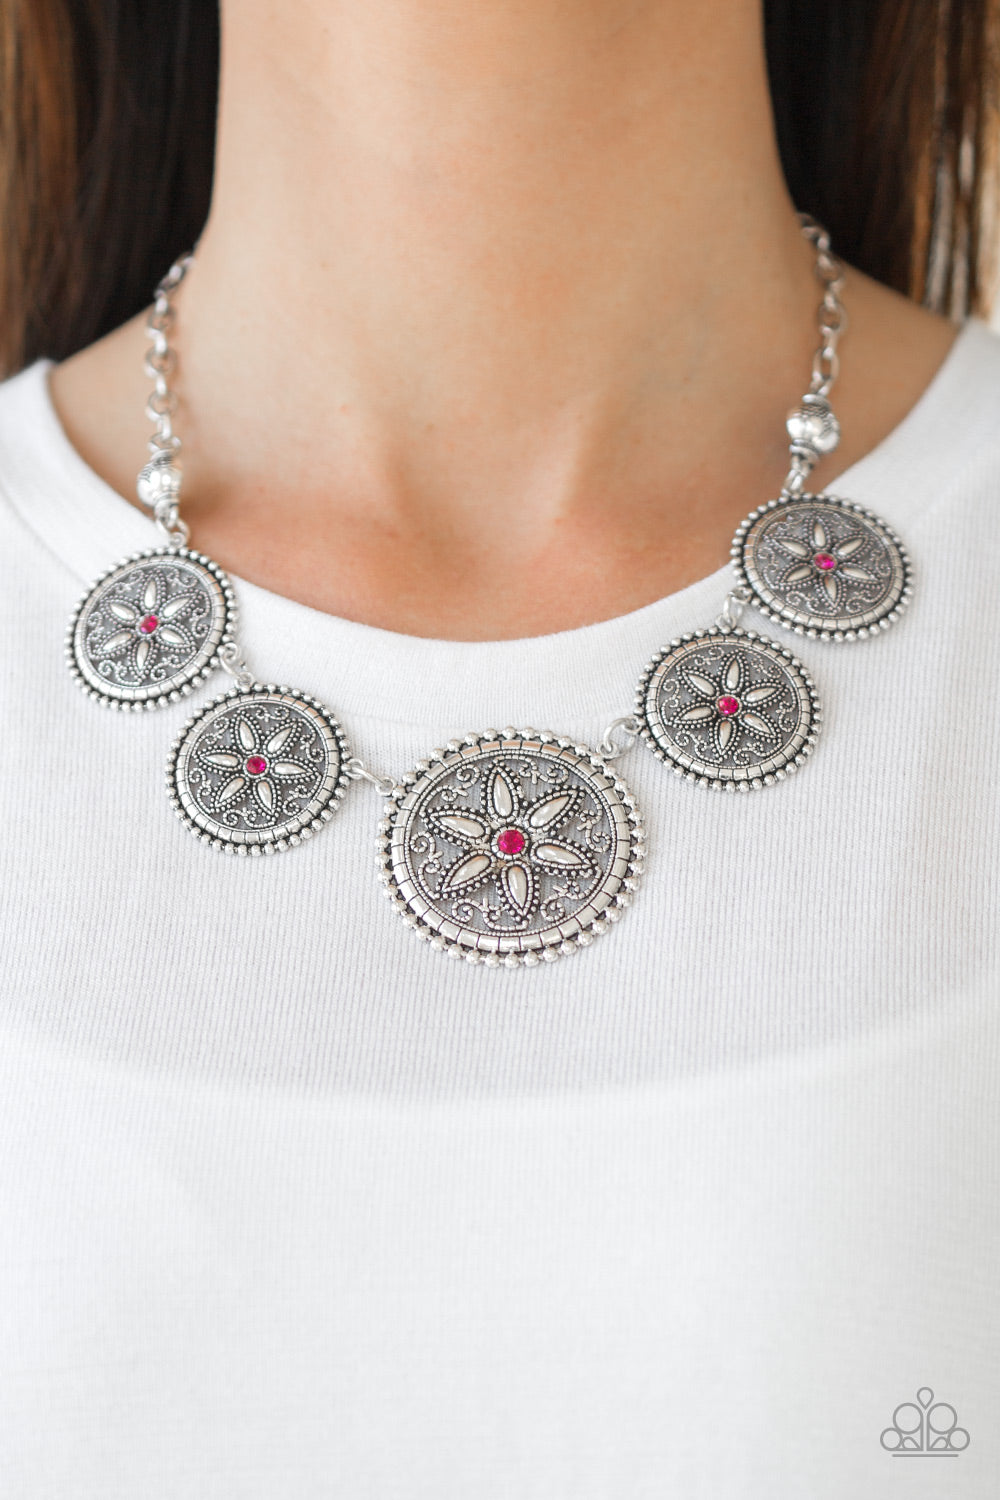 Paparazzi Written In The STAR LILIES - Pink Rhinestone - Sand Dollar - Necklace and matching Earrings - $5 Jewelry With Ashley Swint